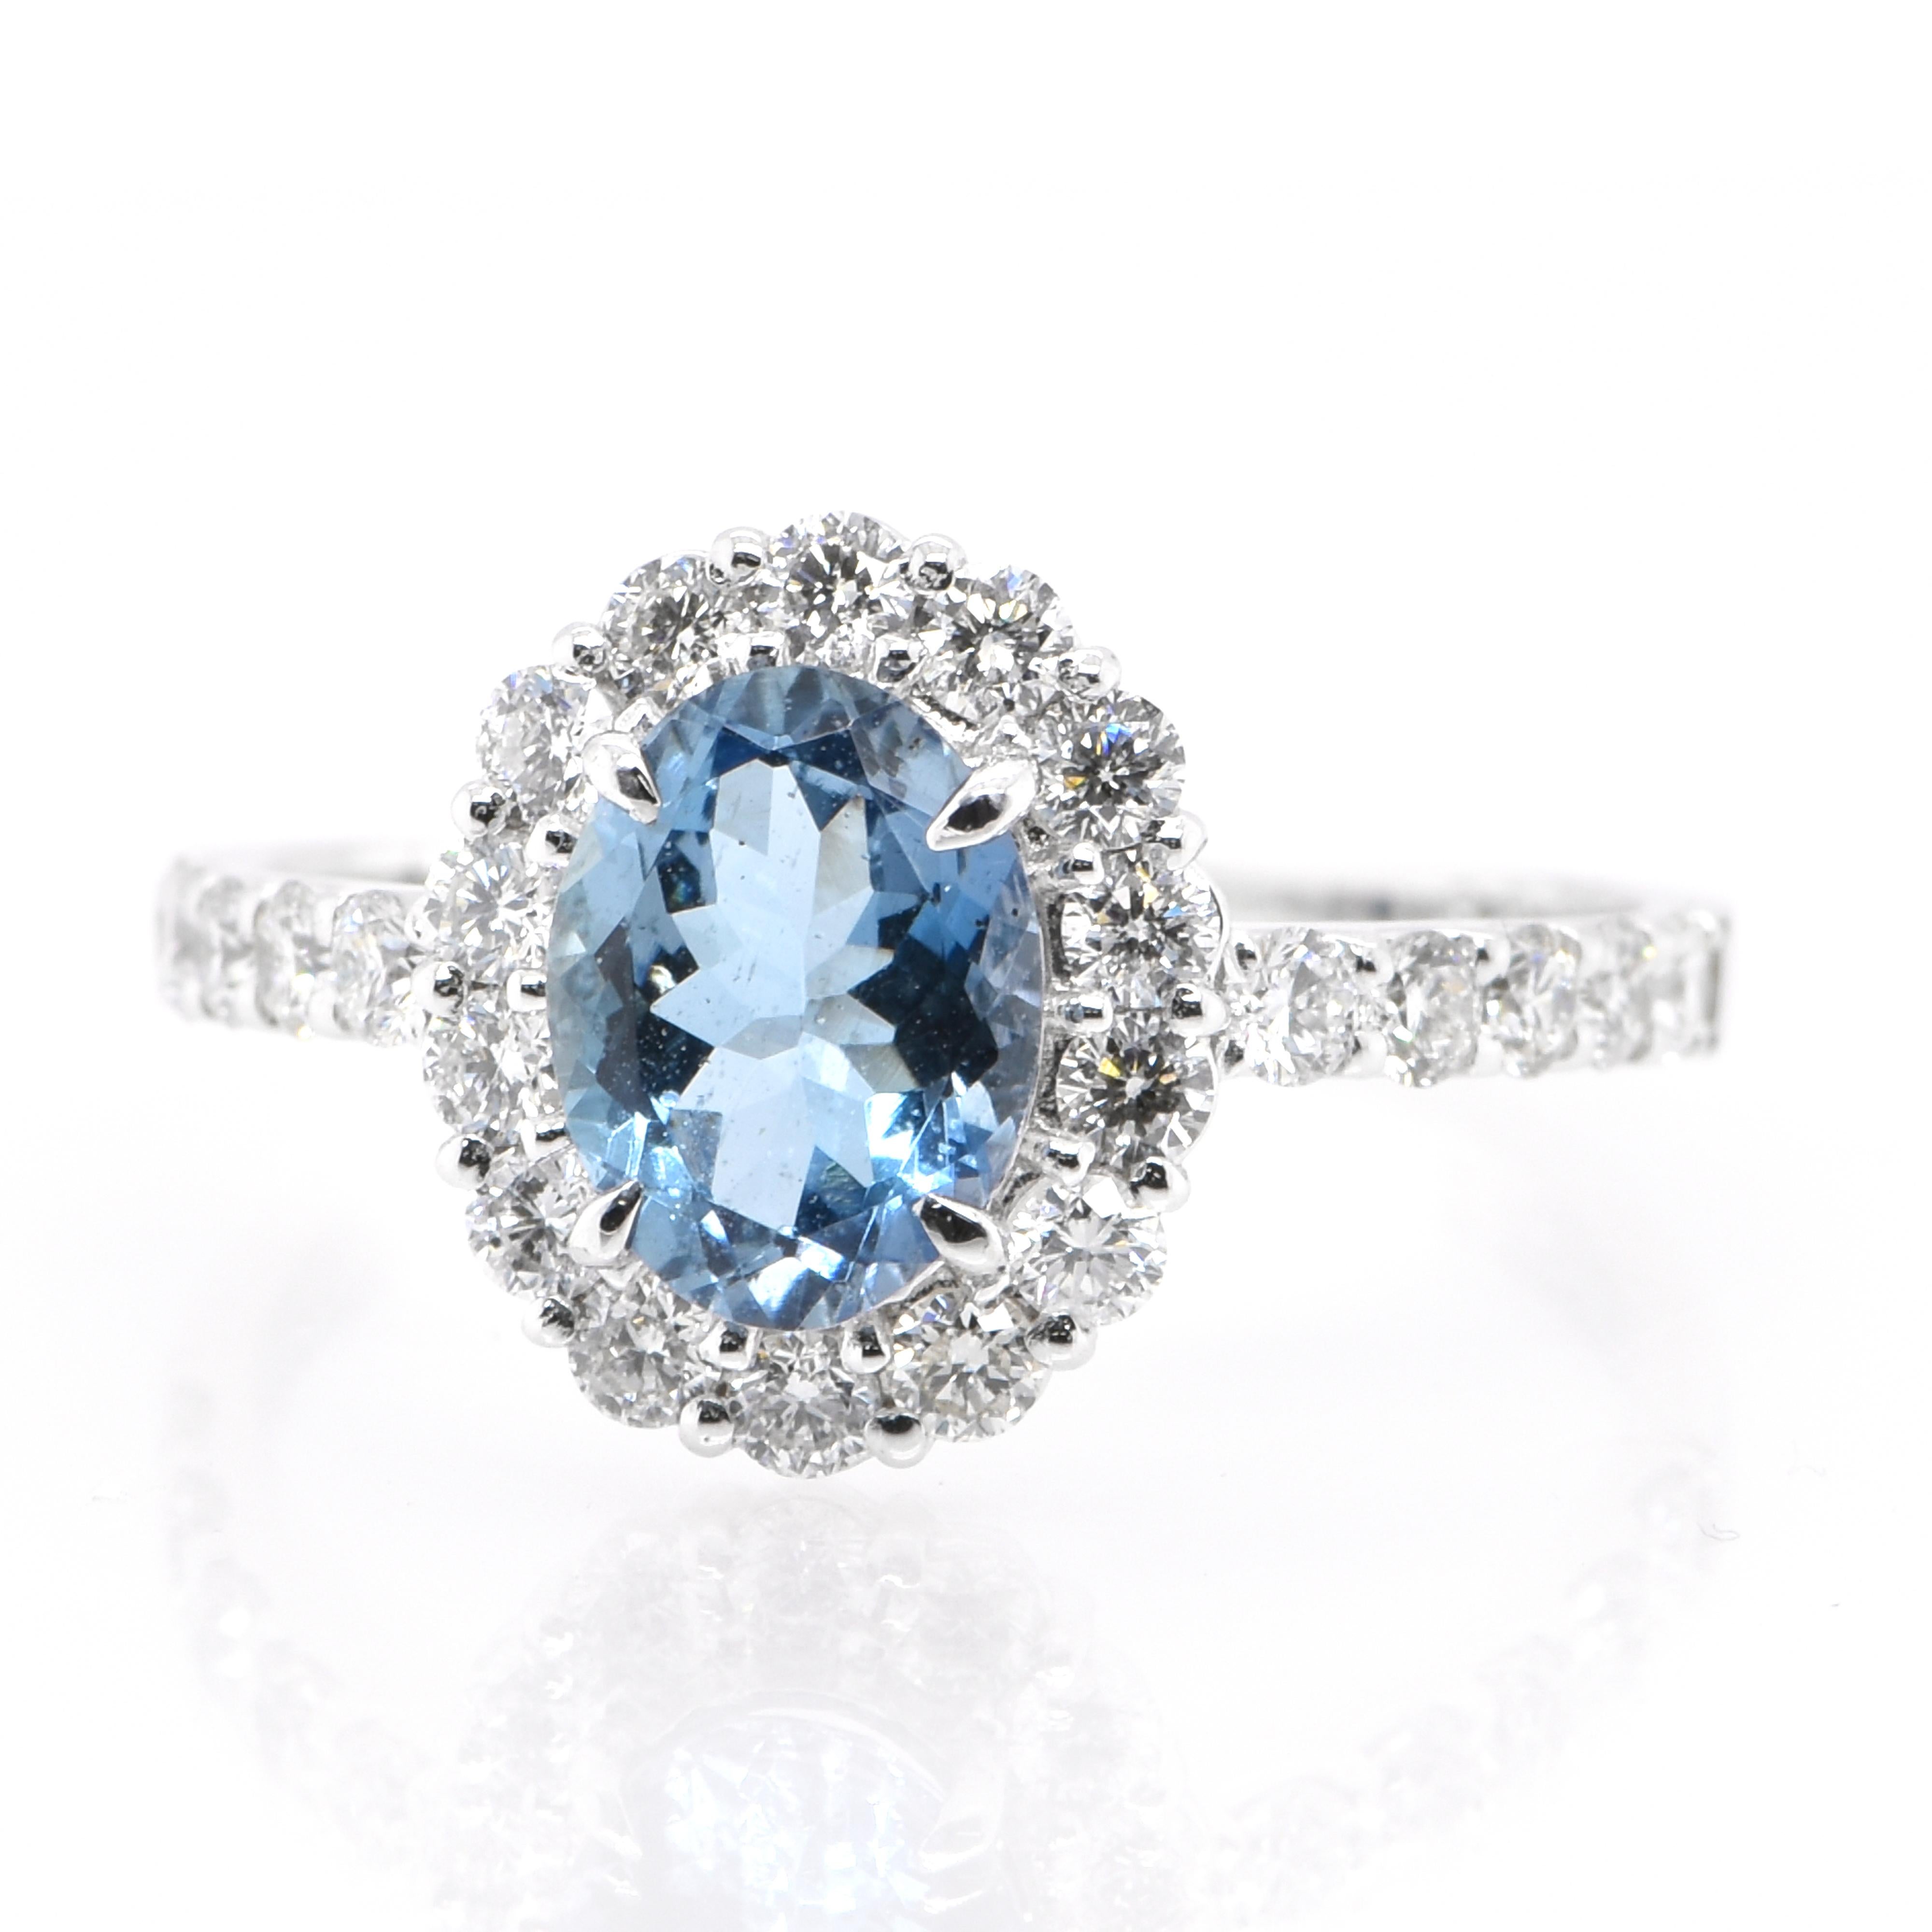 A beautiful Ring featuring a 0.87 Carat, Natural, Aquamarine and 0.65 Carats of Diamond Accents set in Platinum. Aquamarines have been prized gems throughout human history for their cool blue color. They historically come from the Minas Gerais,